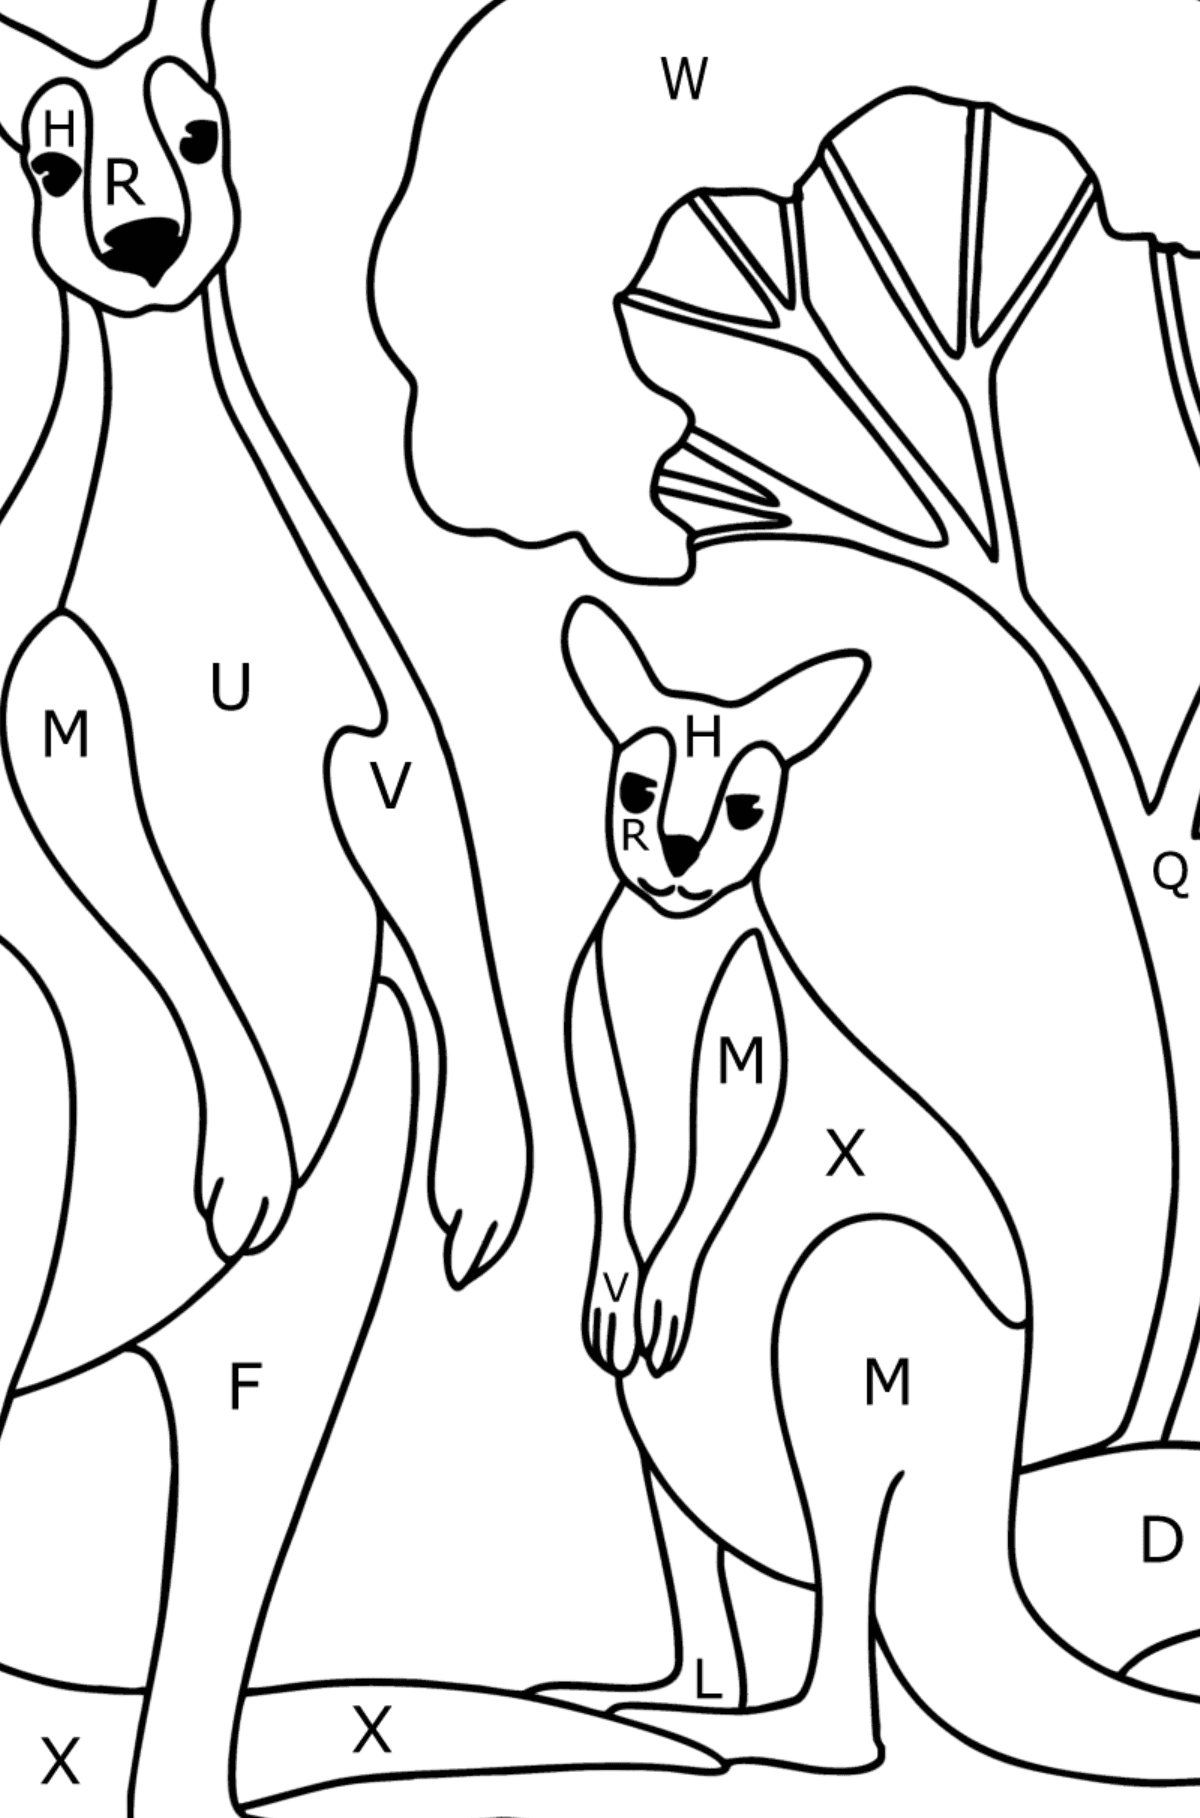 Kangaroo with Baby Coloring Page - Coloring by Letters for Kids